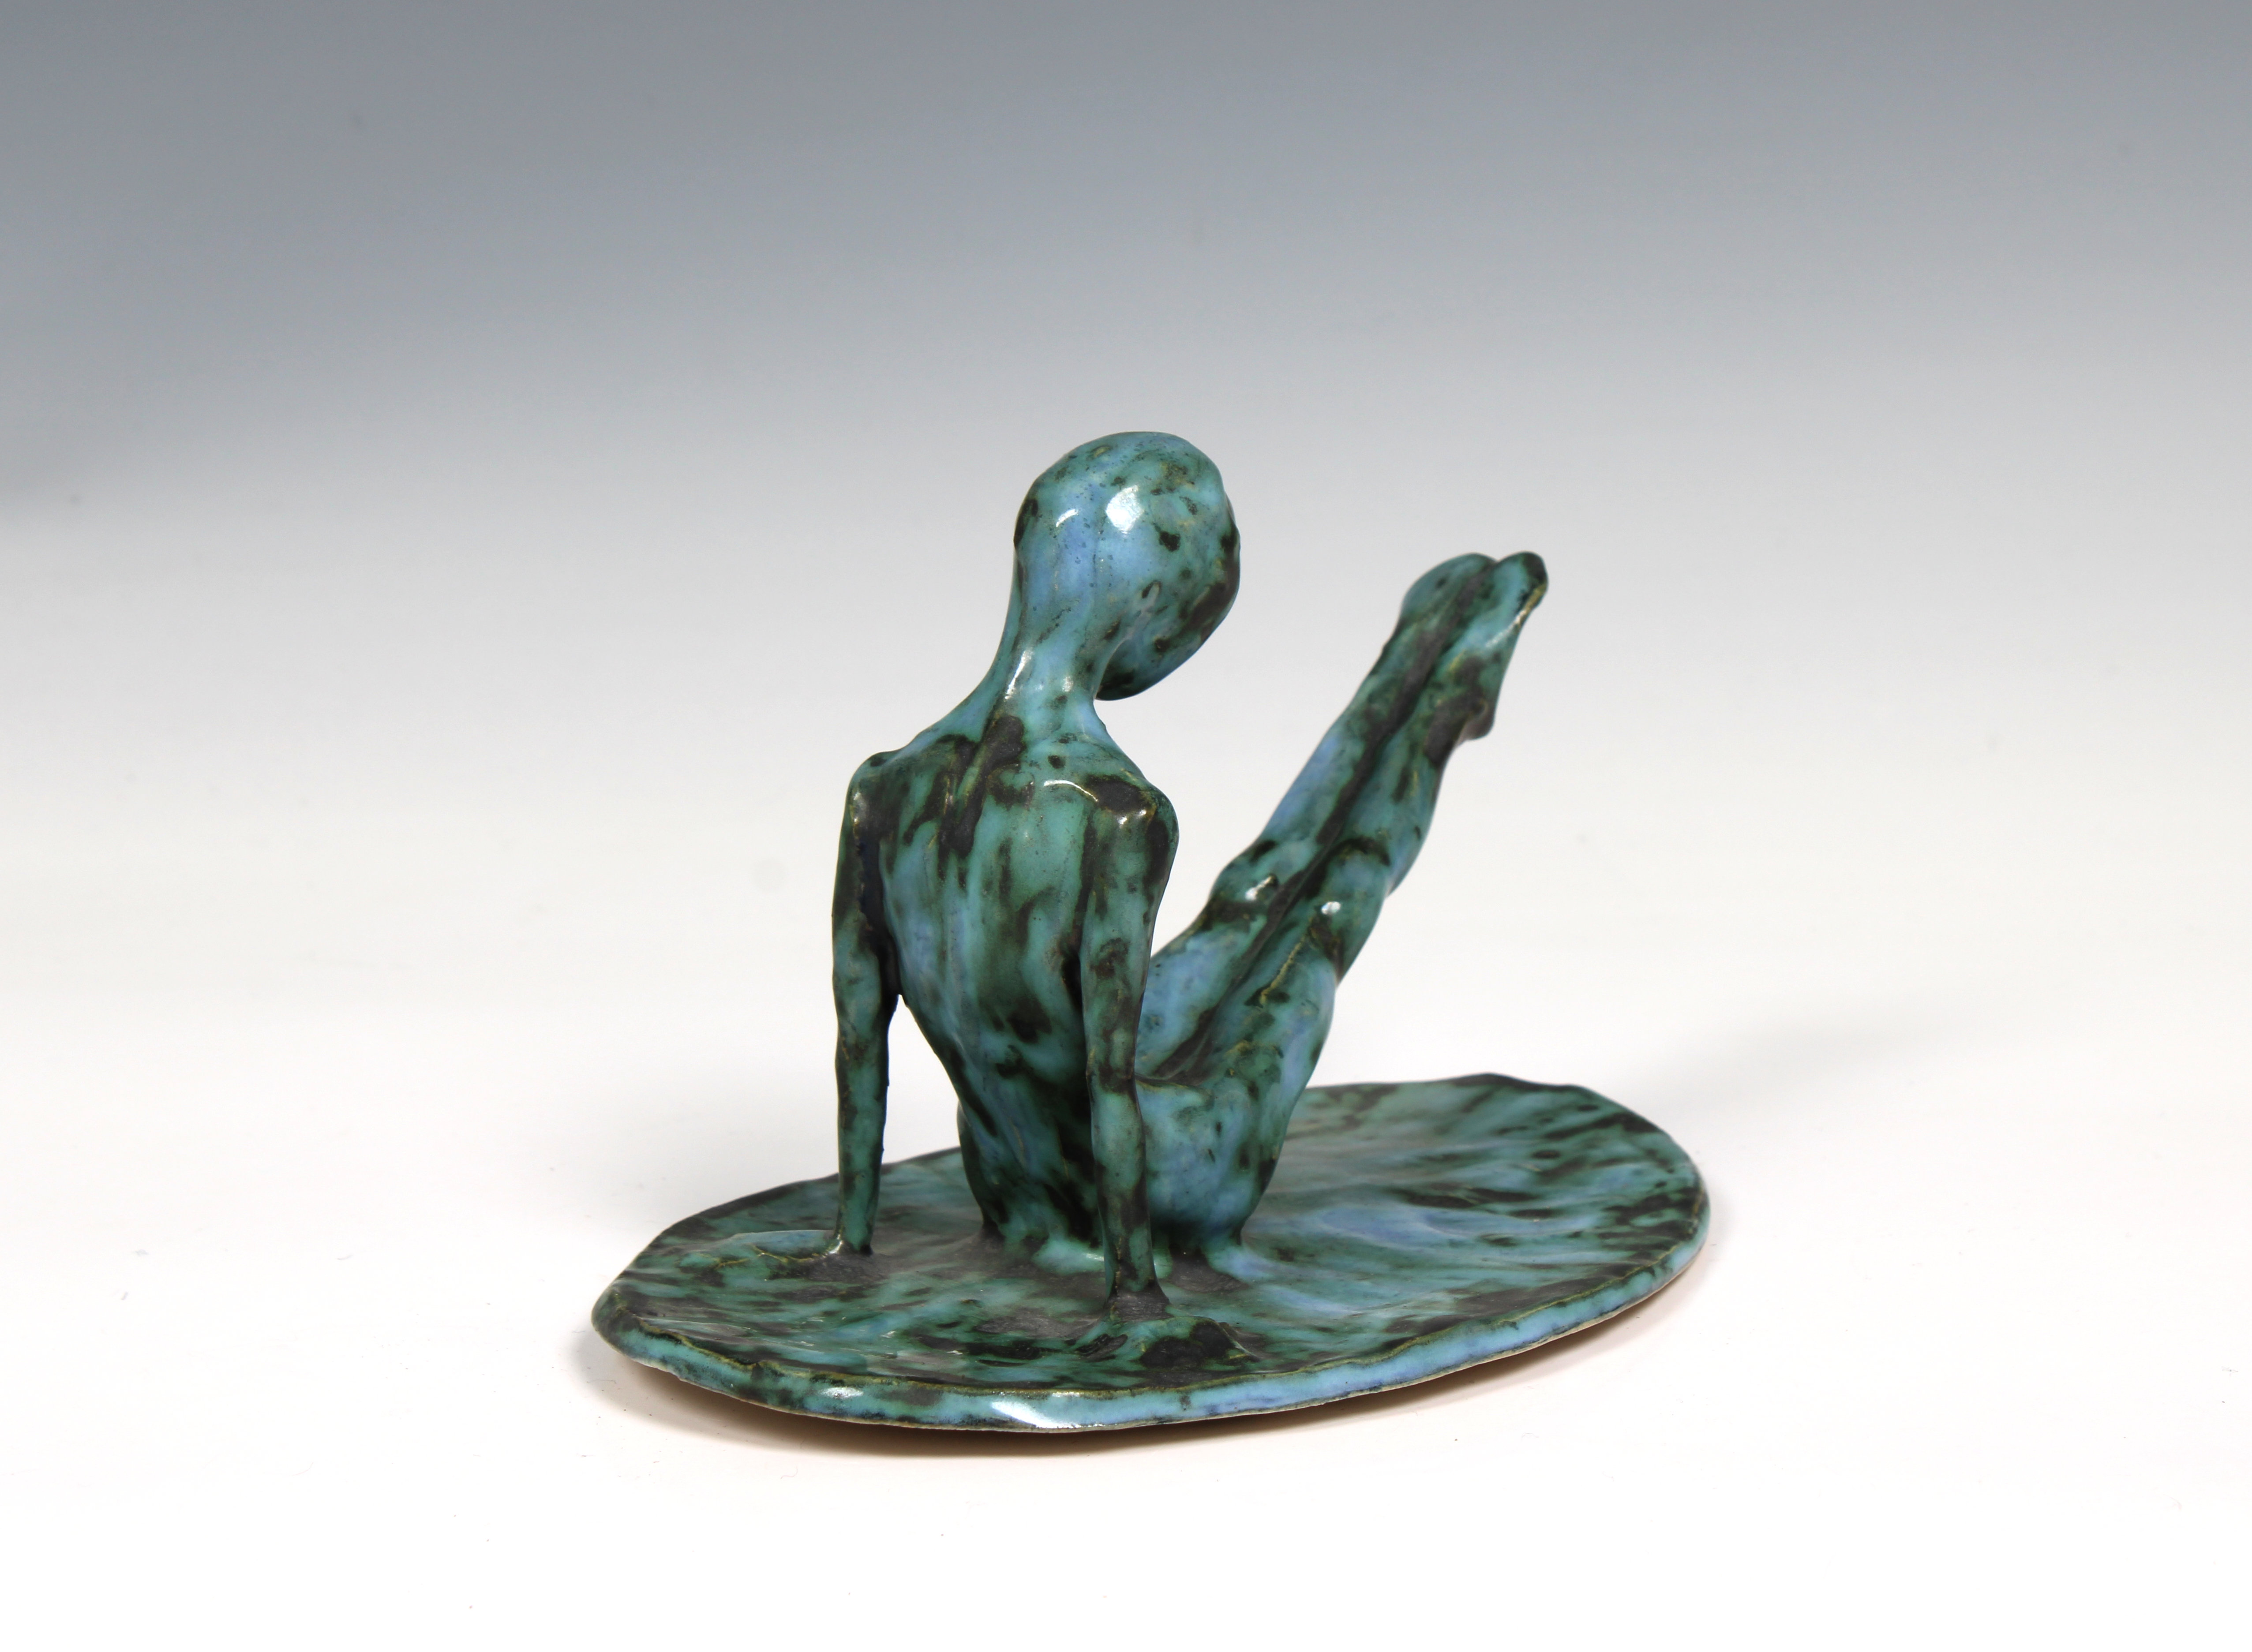 Elizabeth Ann Macphail (1939-89) glazed sculpture featuring a stylised figure doing floor exercises - Image 2 of 4